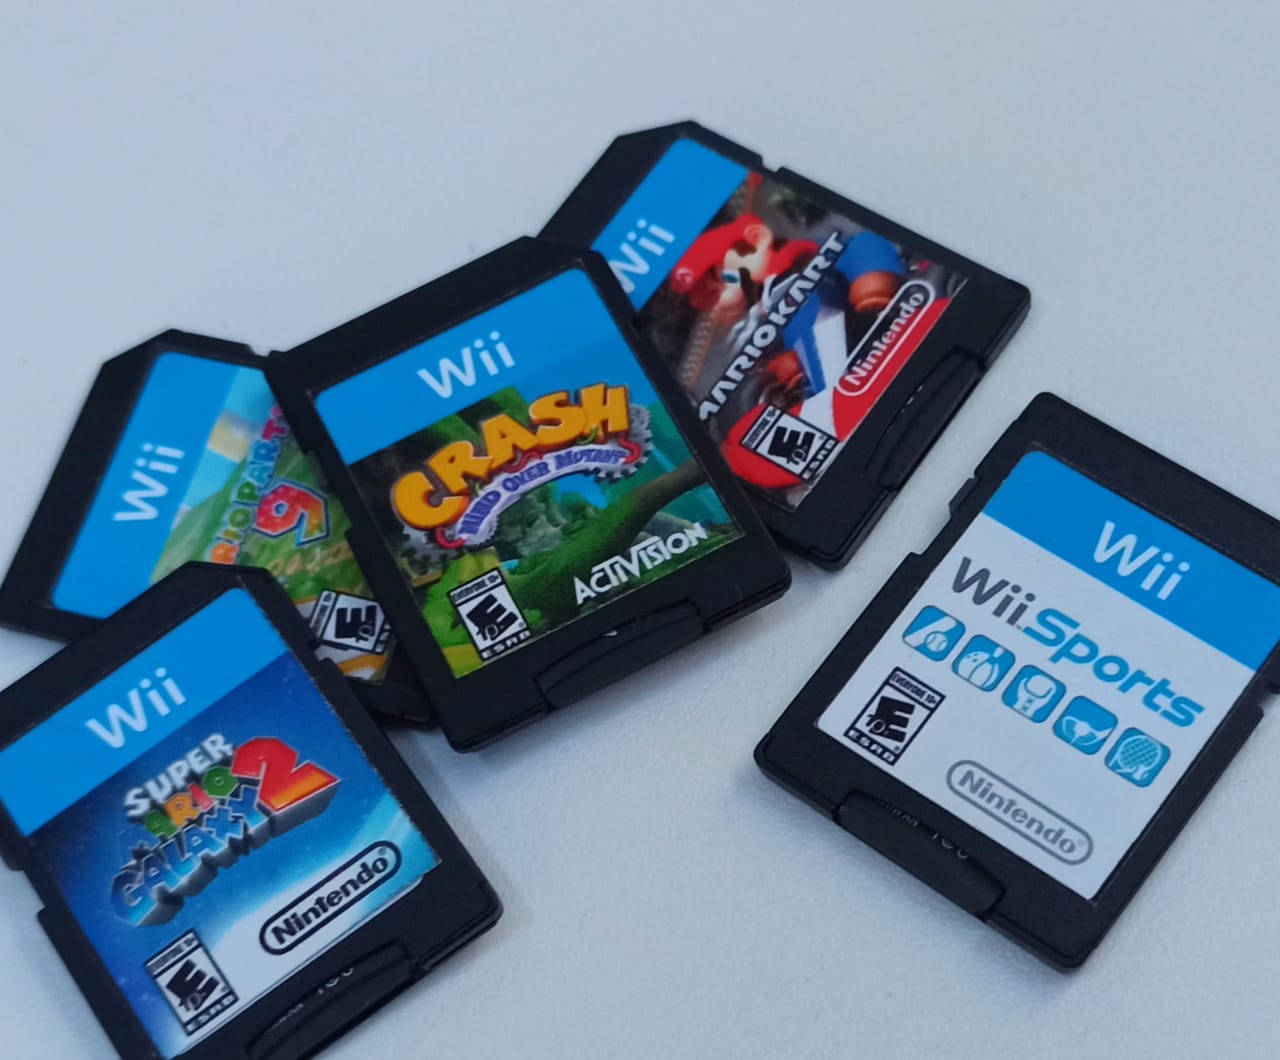 How To Download Wii Games On SD Card